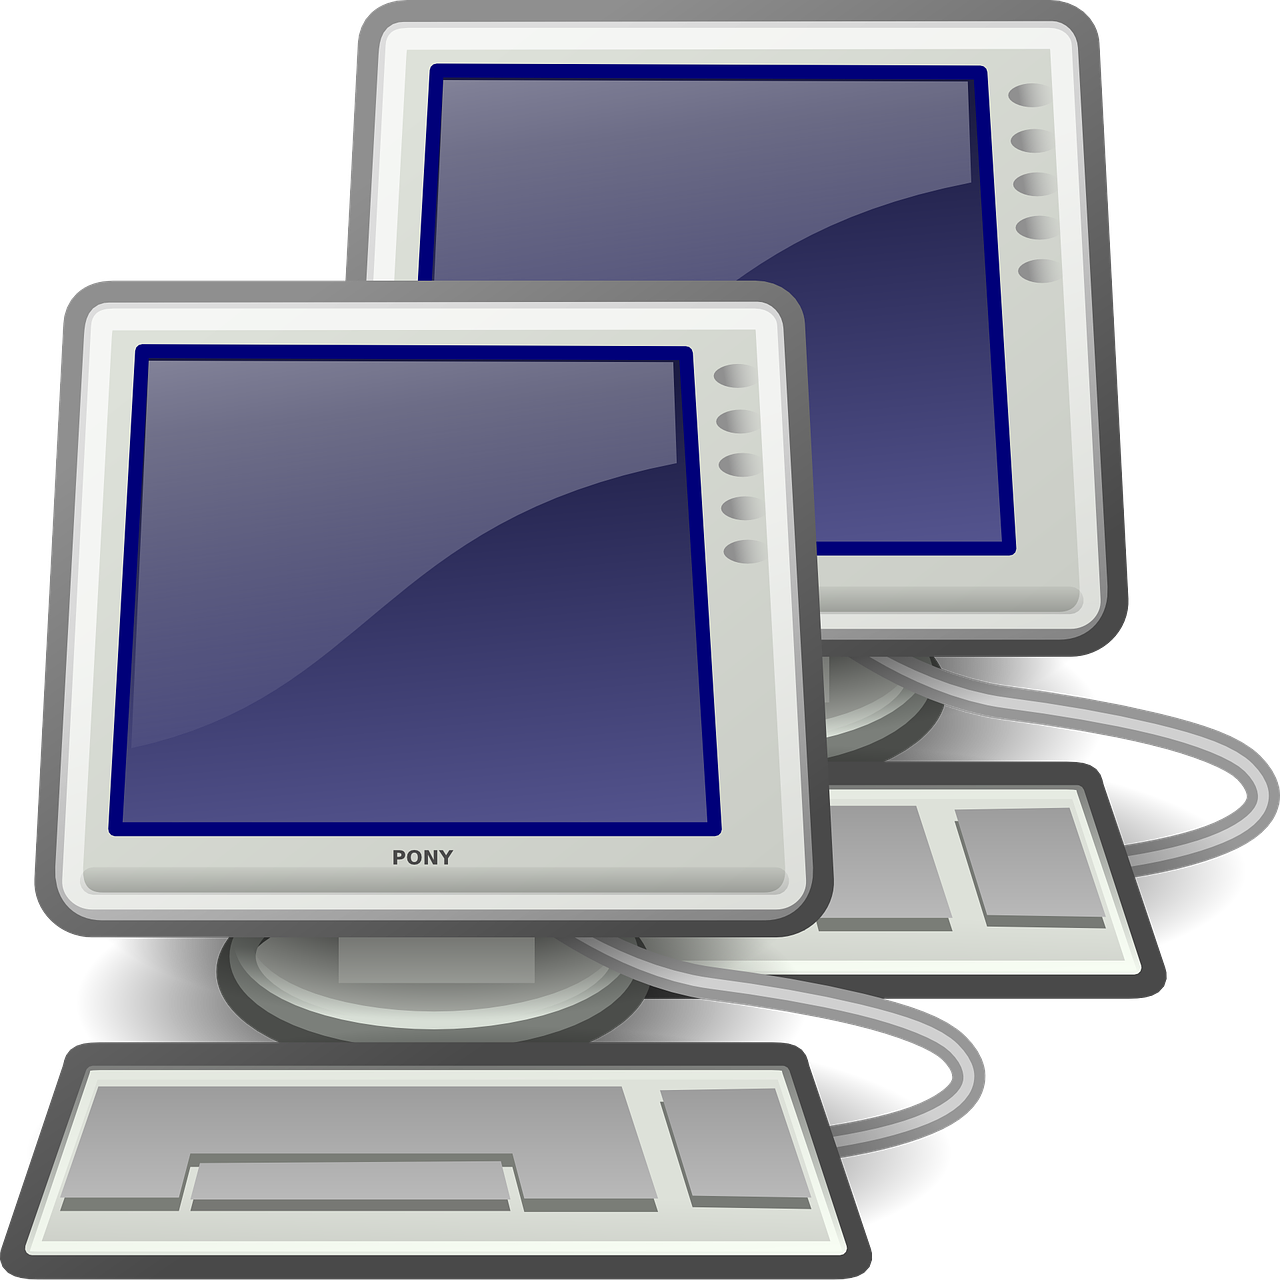 network computer workstations free photo